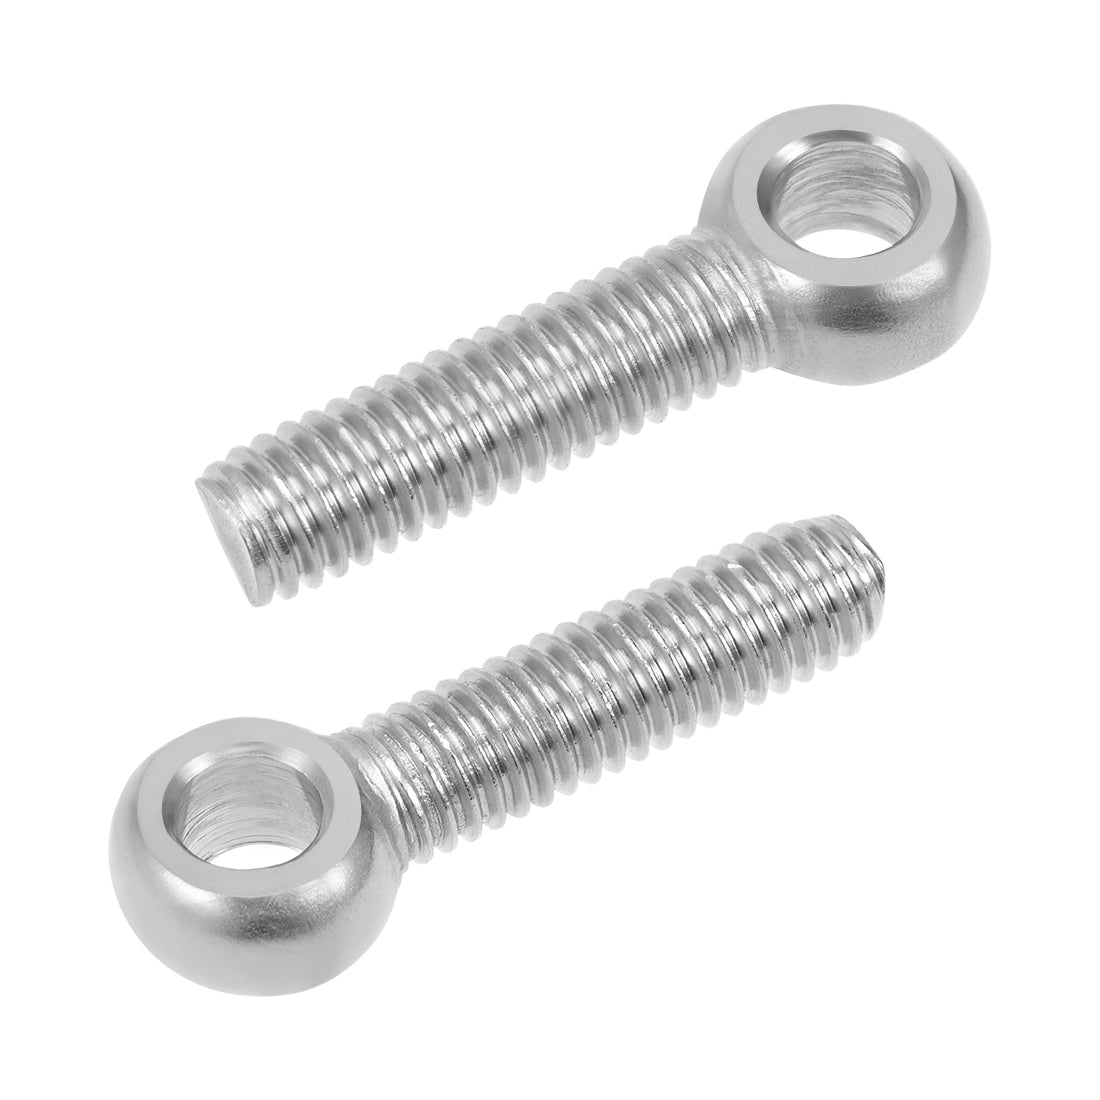 uxcell Uxcell M6 x 25mm Machinery Shoulder Swing Lifting Eye Bolt 304 Stainless Steel Metric Thread 5pcs